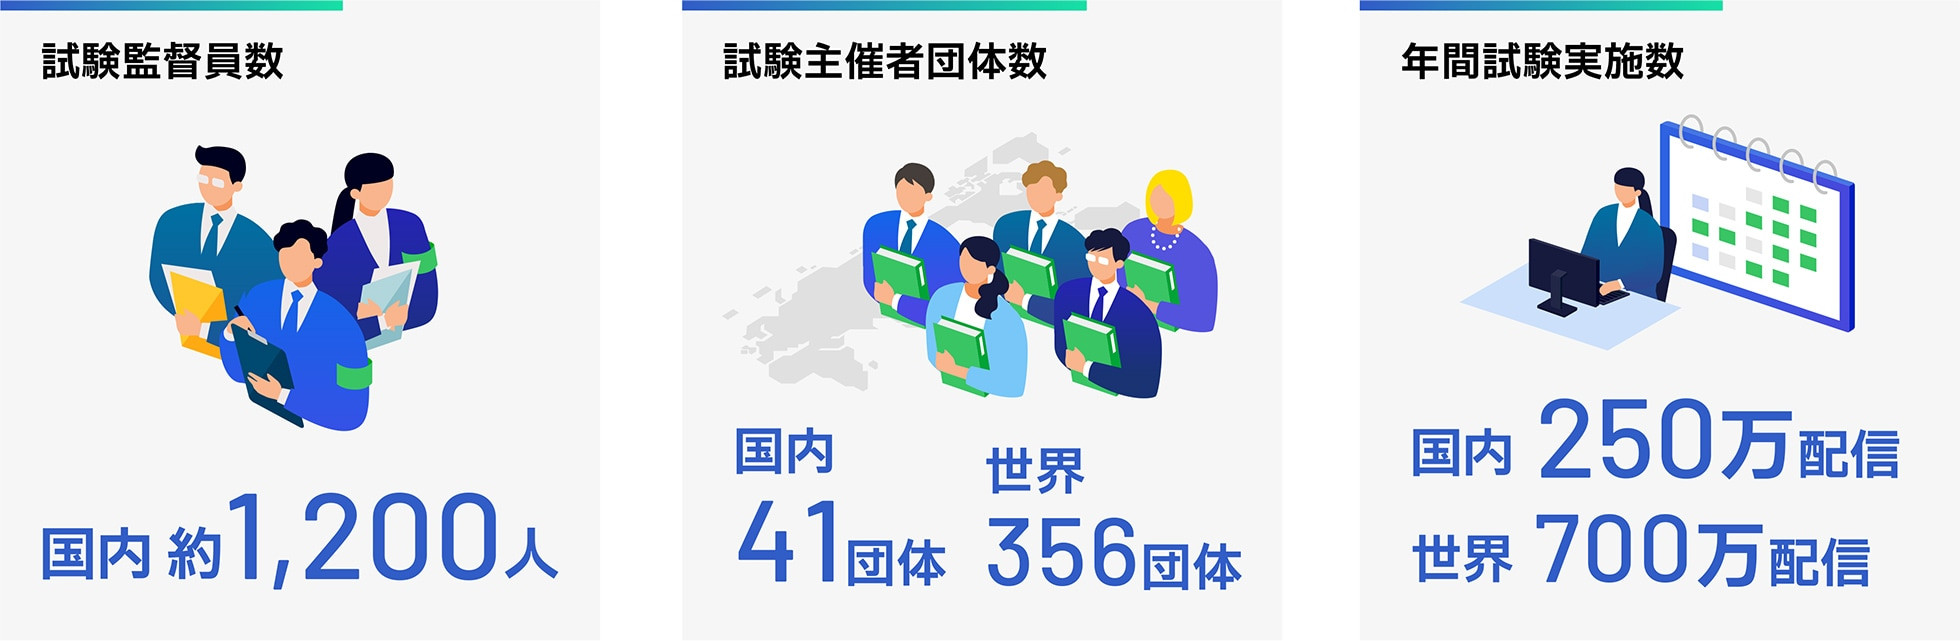 Number of Test proctors: Approximately 1,200 in Japan, Number of Test Test Sponsor organizations: 41 in Japan, 356 worldwide, Number of Test conducted annually: 2.5 million distributed domestically, 7 million distributed worldwide